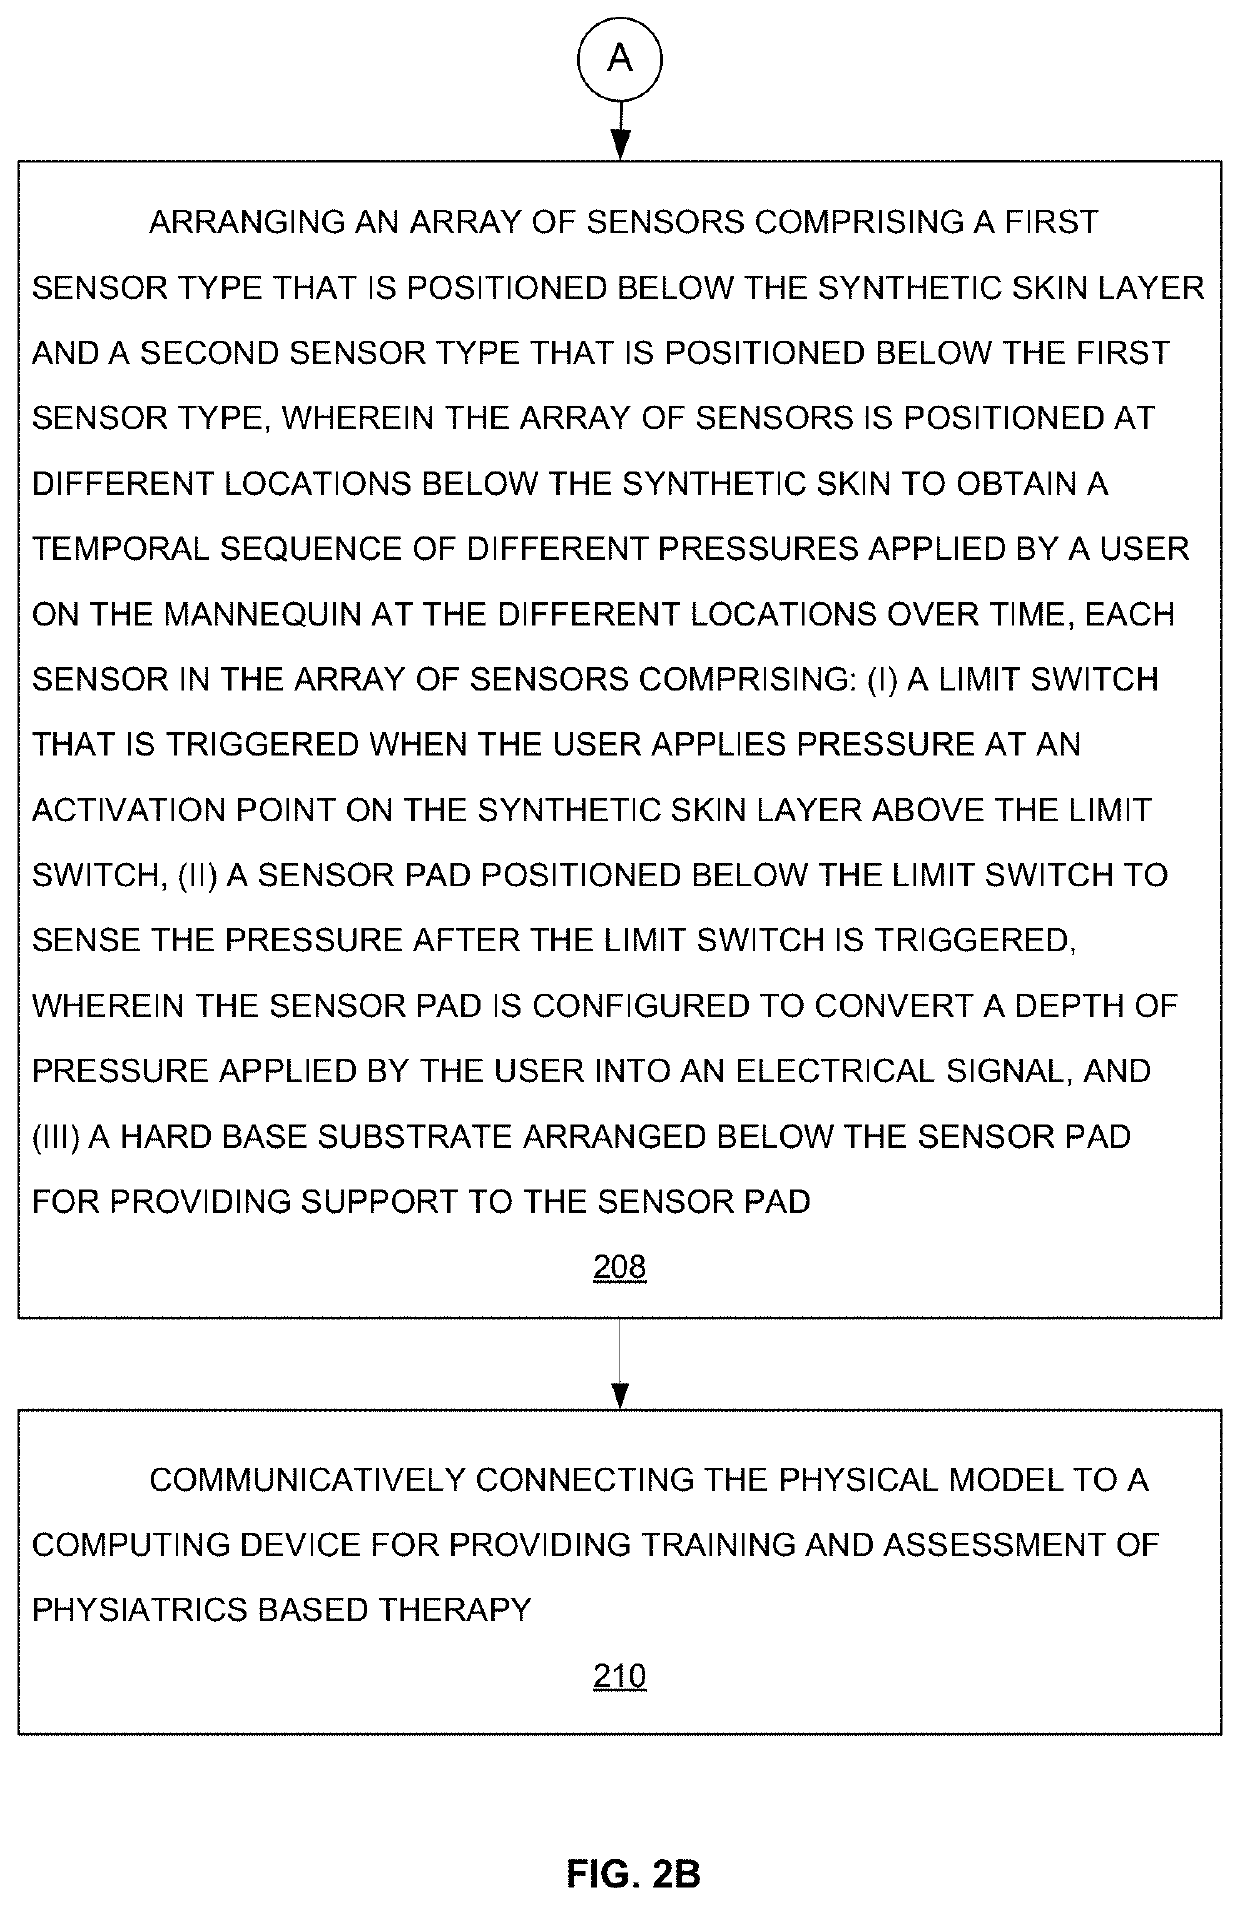 Providing training and assessment of physiatrics and cosmetics processes on a physical model having tactile sensors, using a virtual reality device